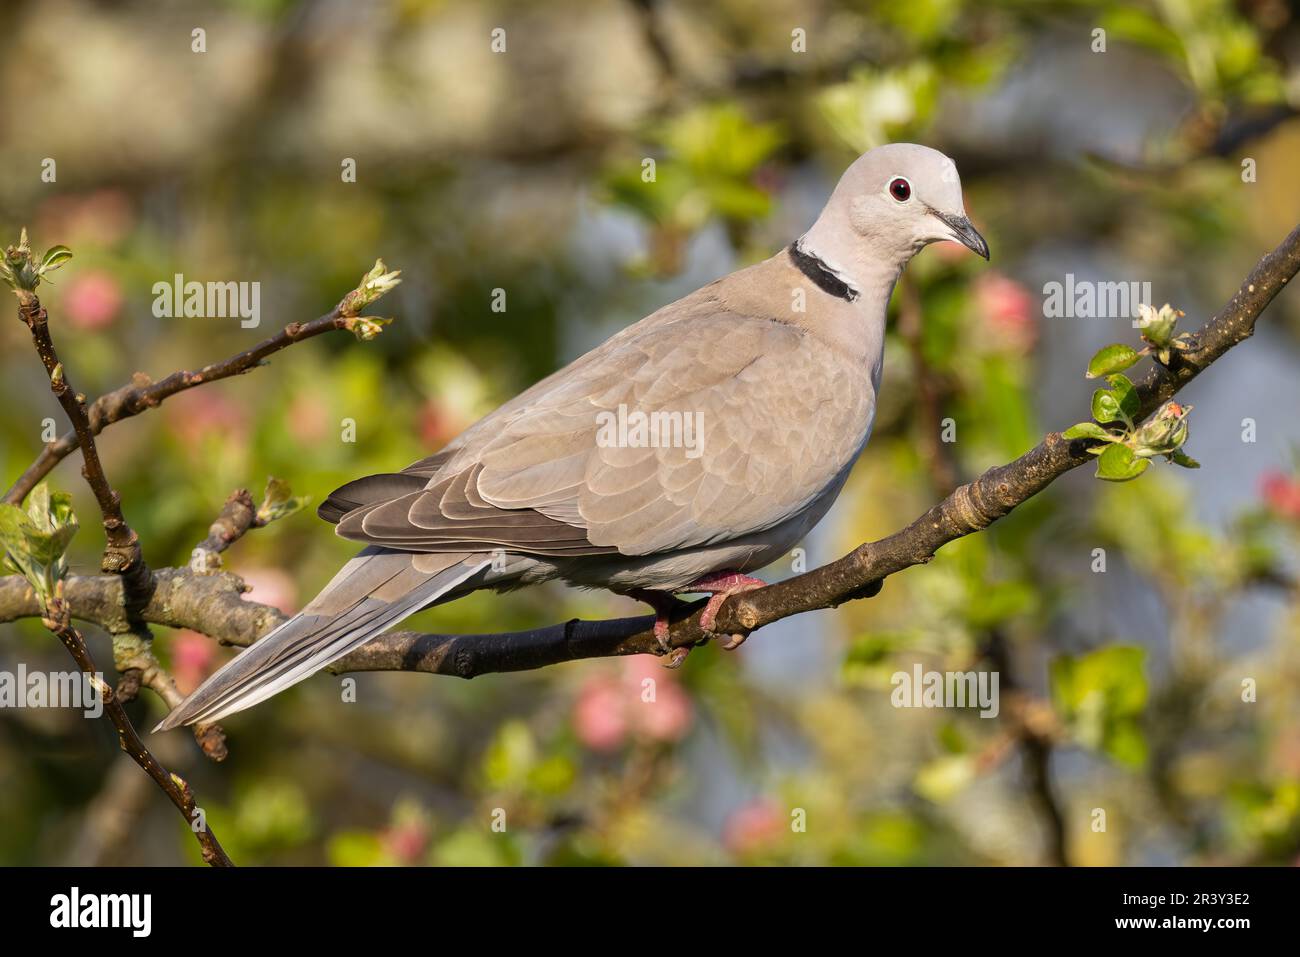 Collared Dove perched in an apple tree Stock Photo